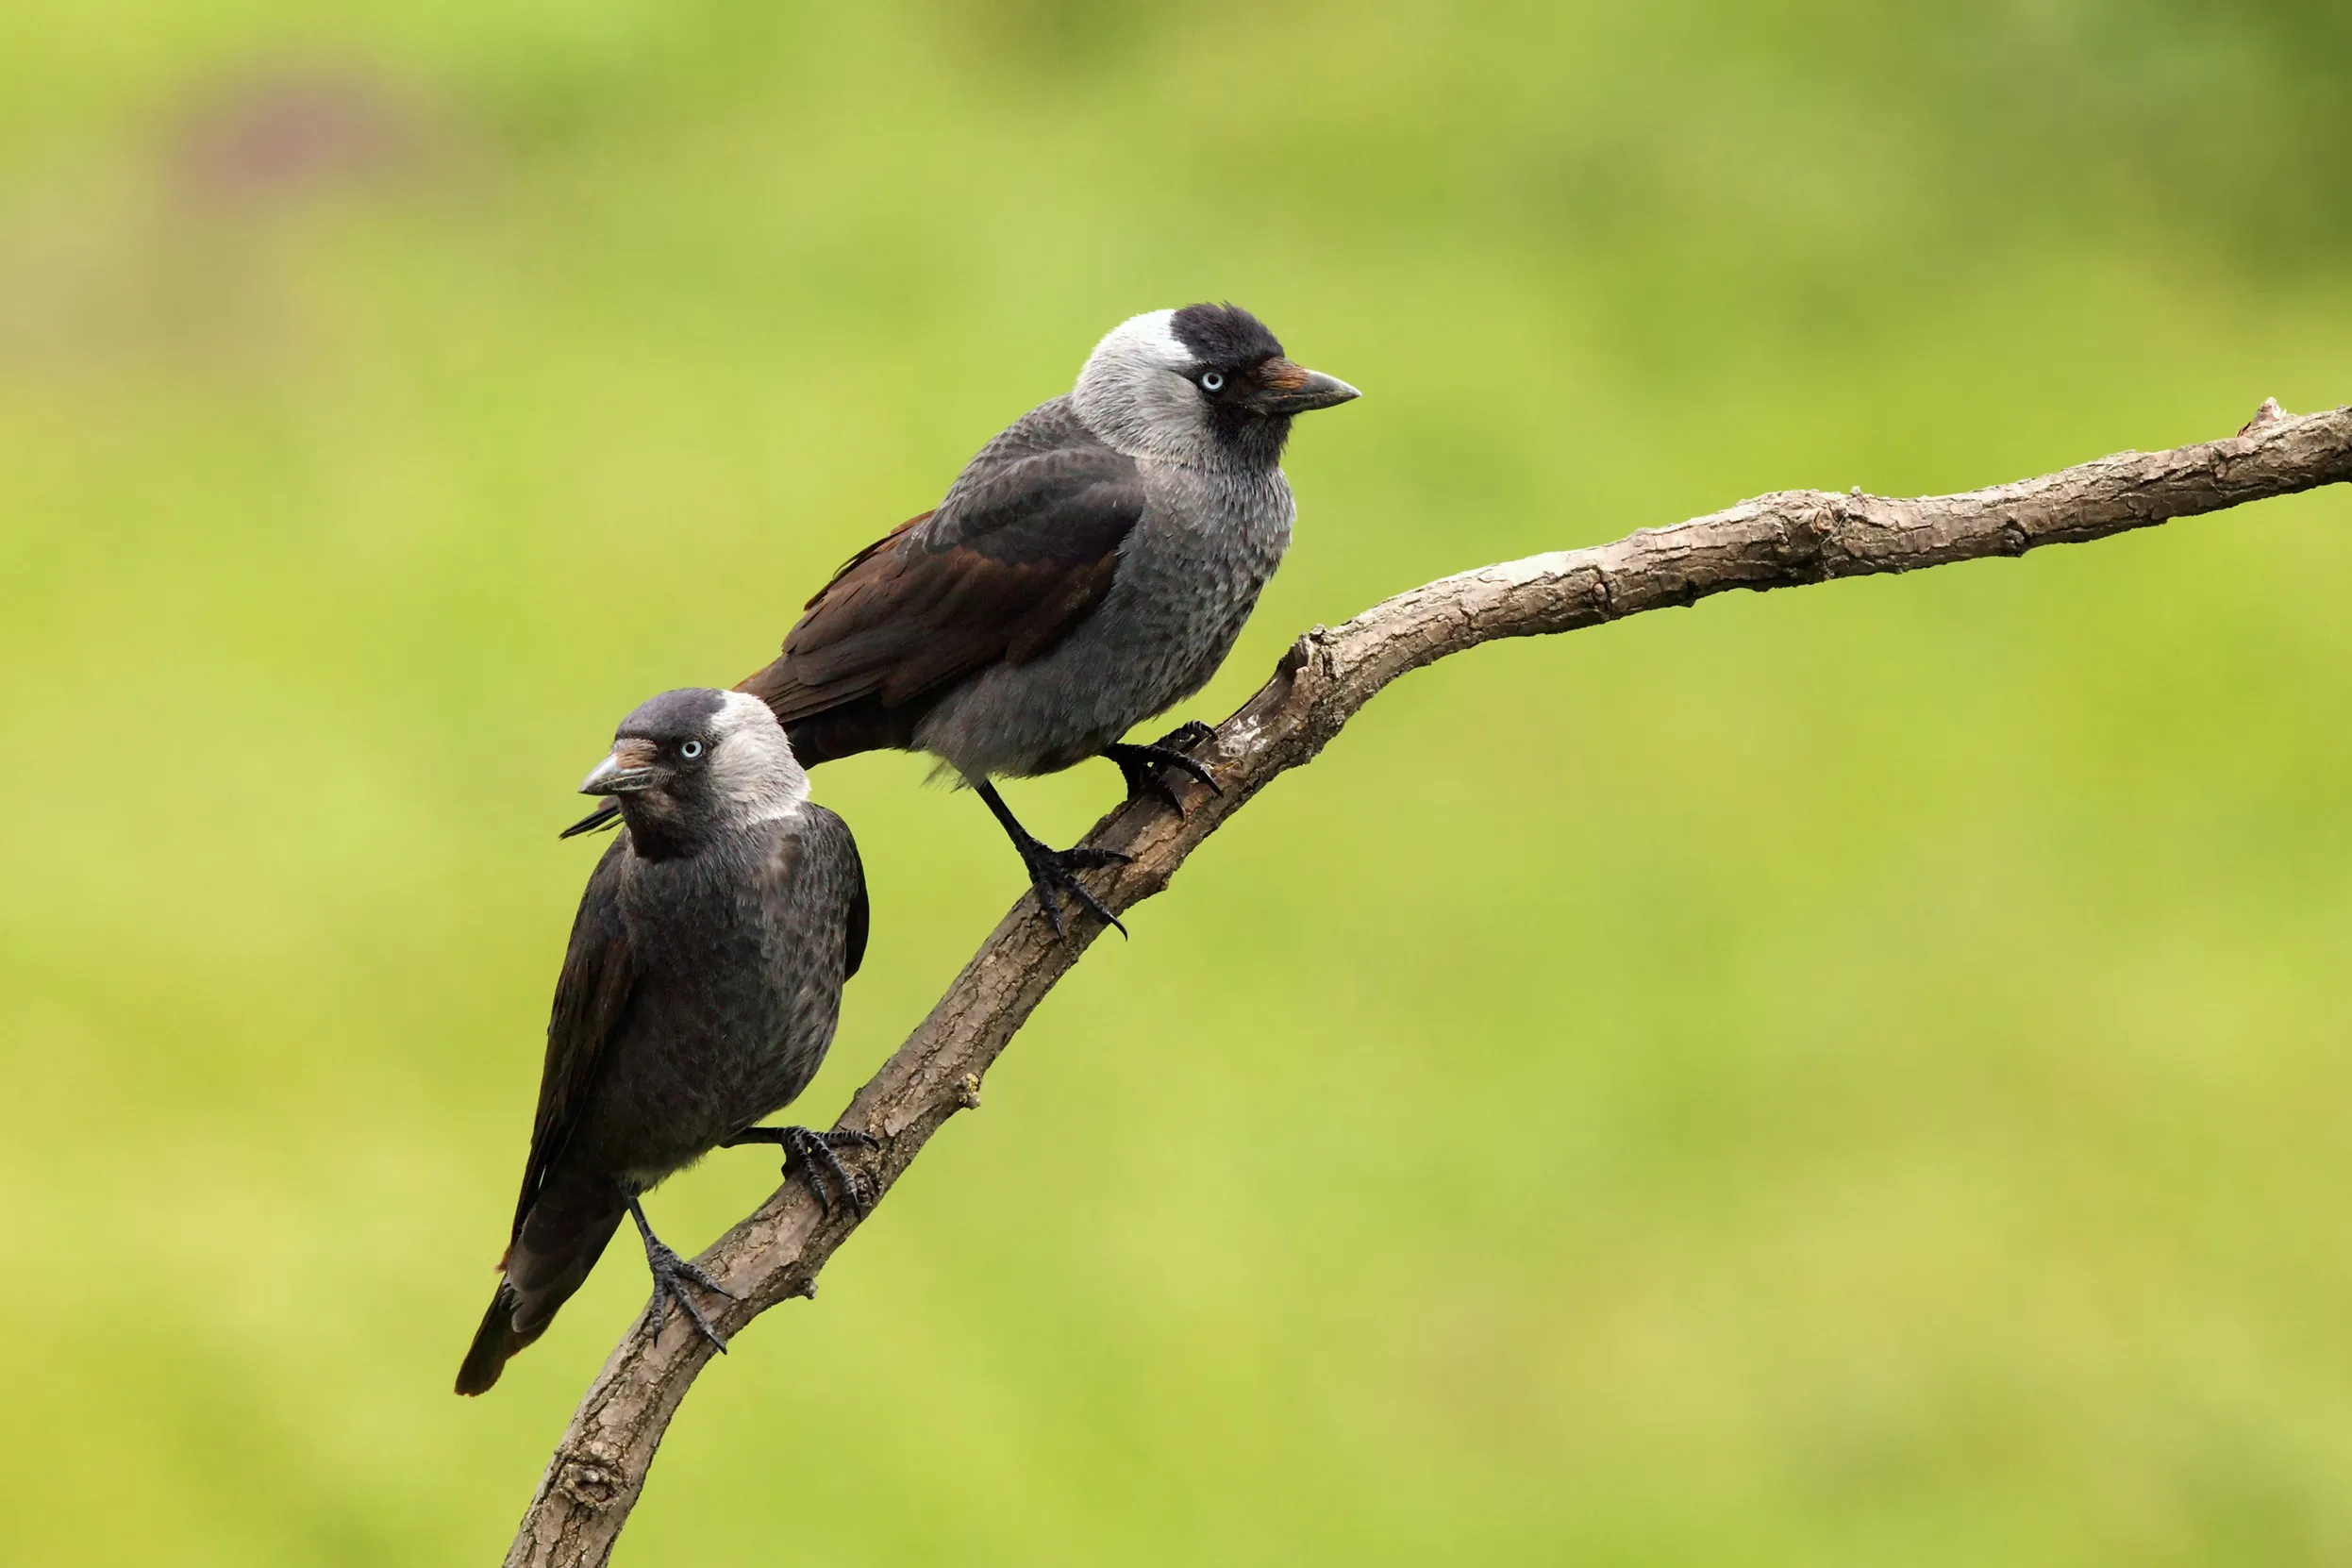 A pair of Jackdaw perched on a branch together.